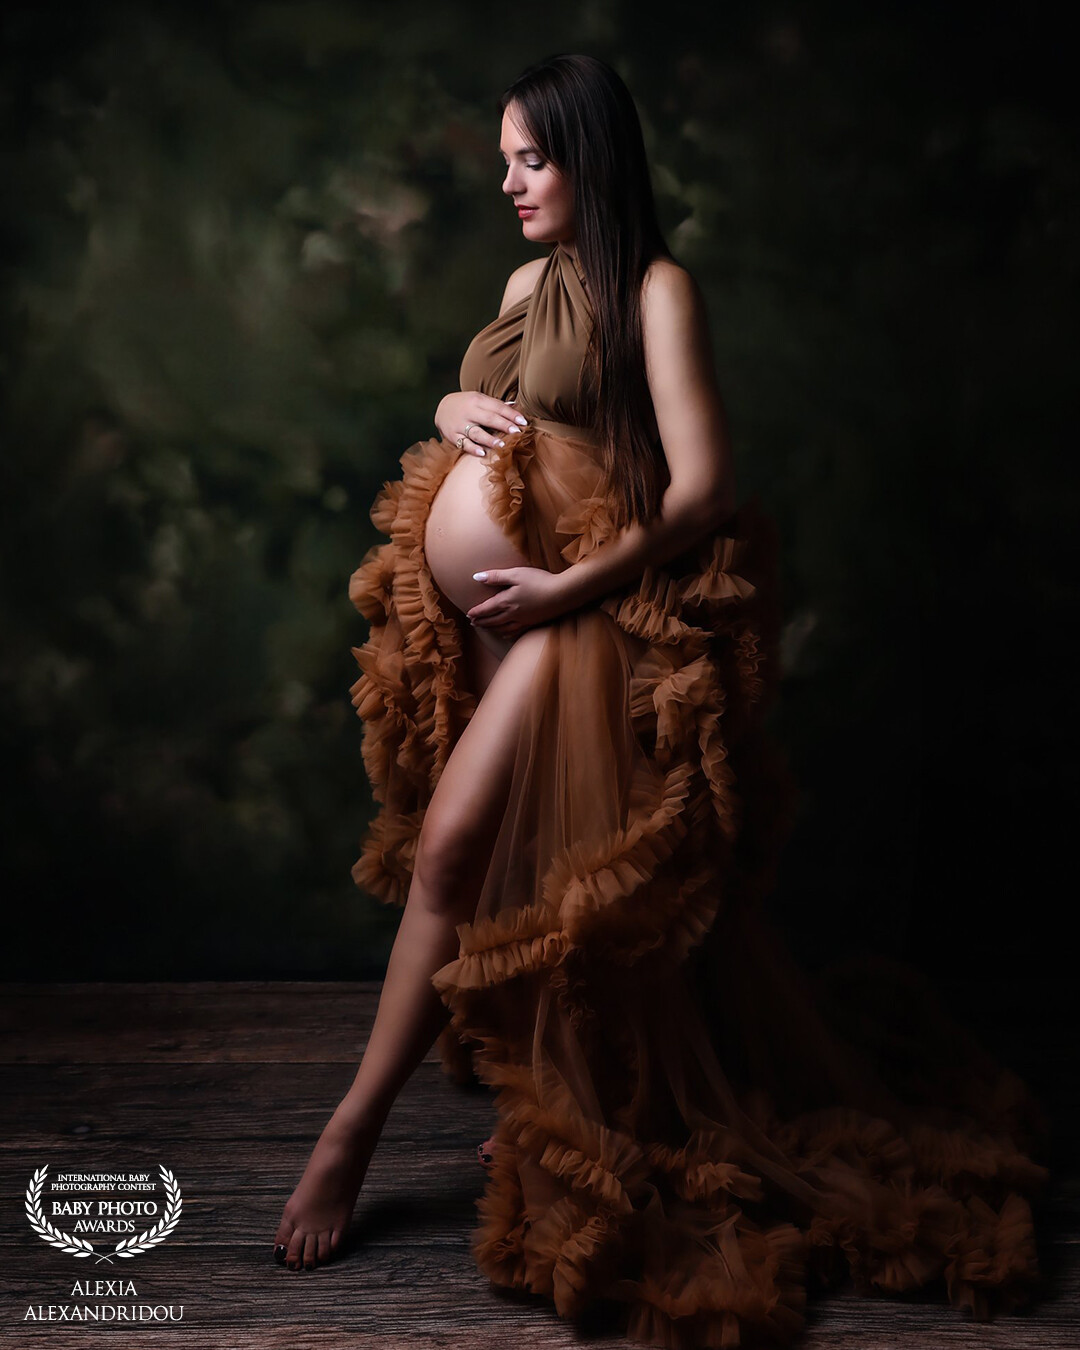 Last-minute magic!  This maternity session turned into pure perfection. Sometimes, the best moments are the unplanned ones.